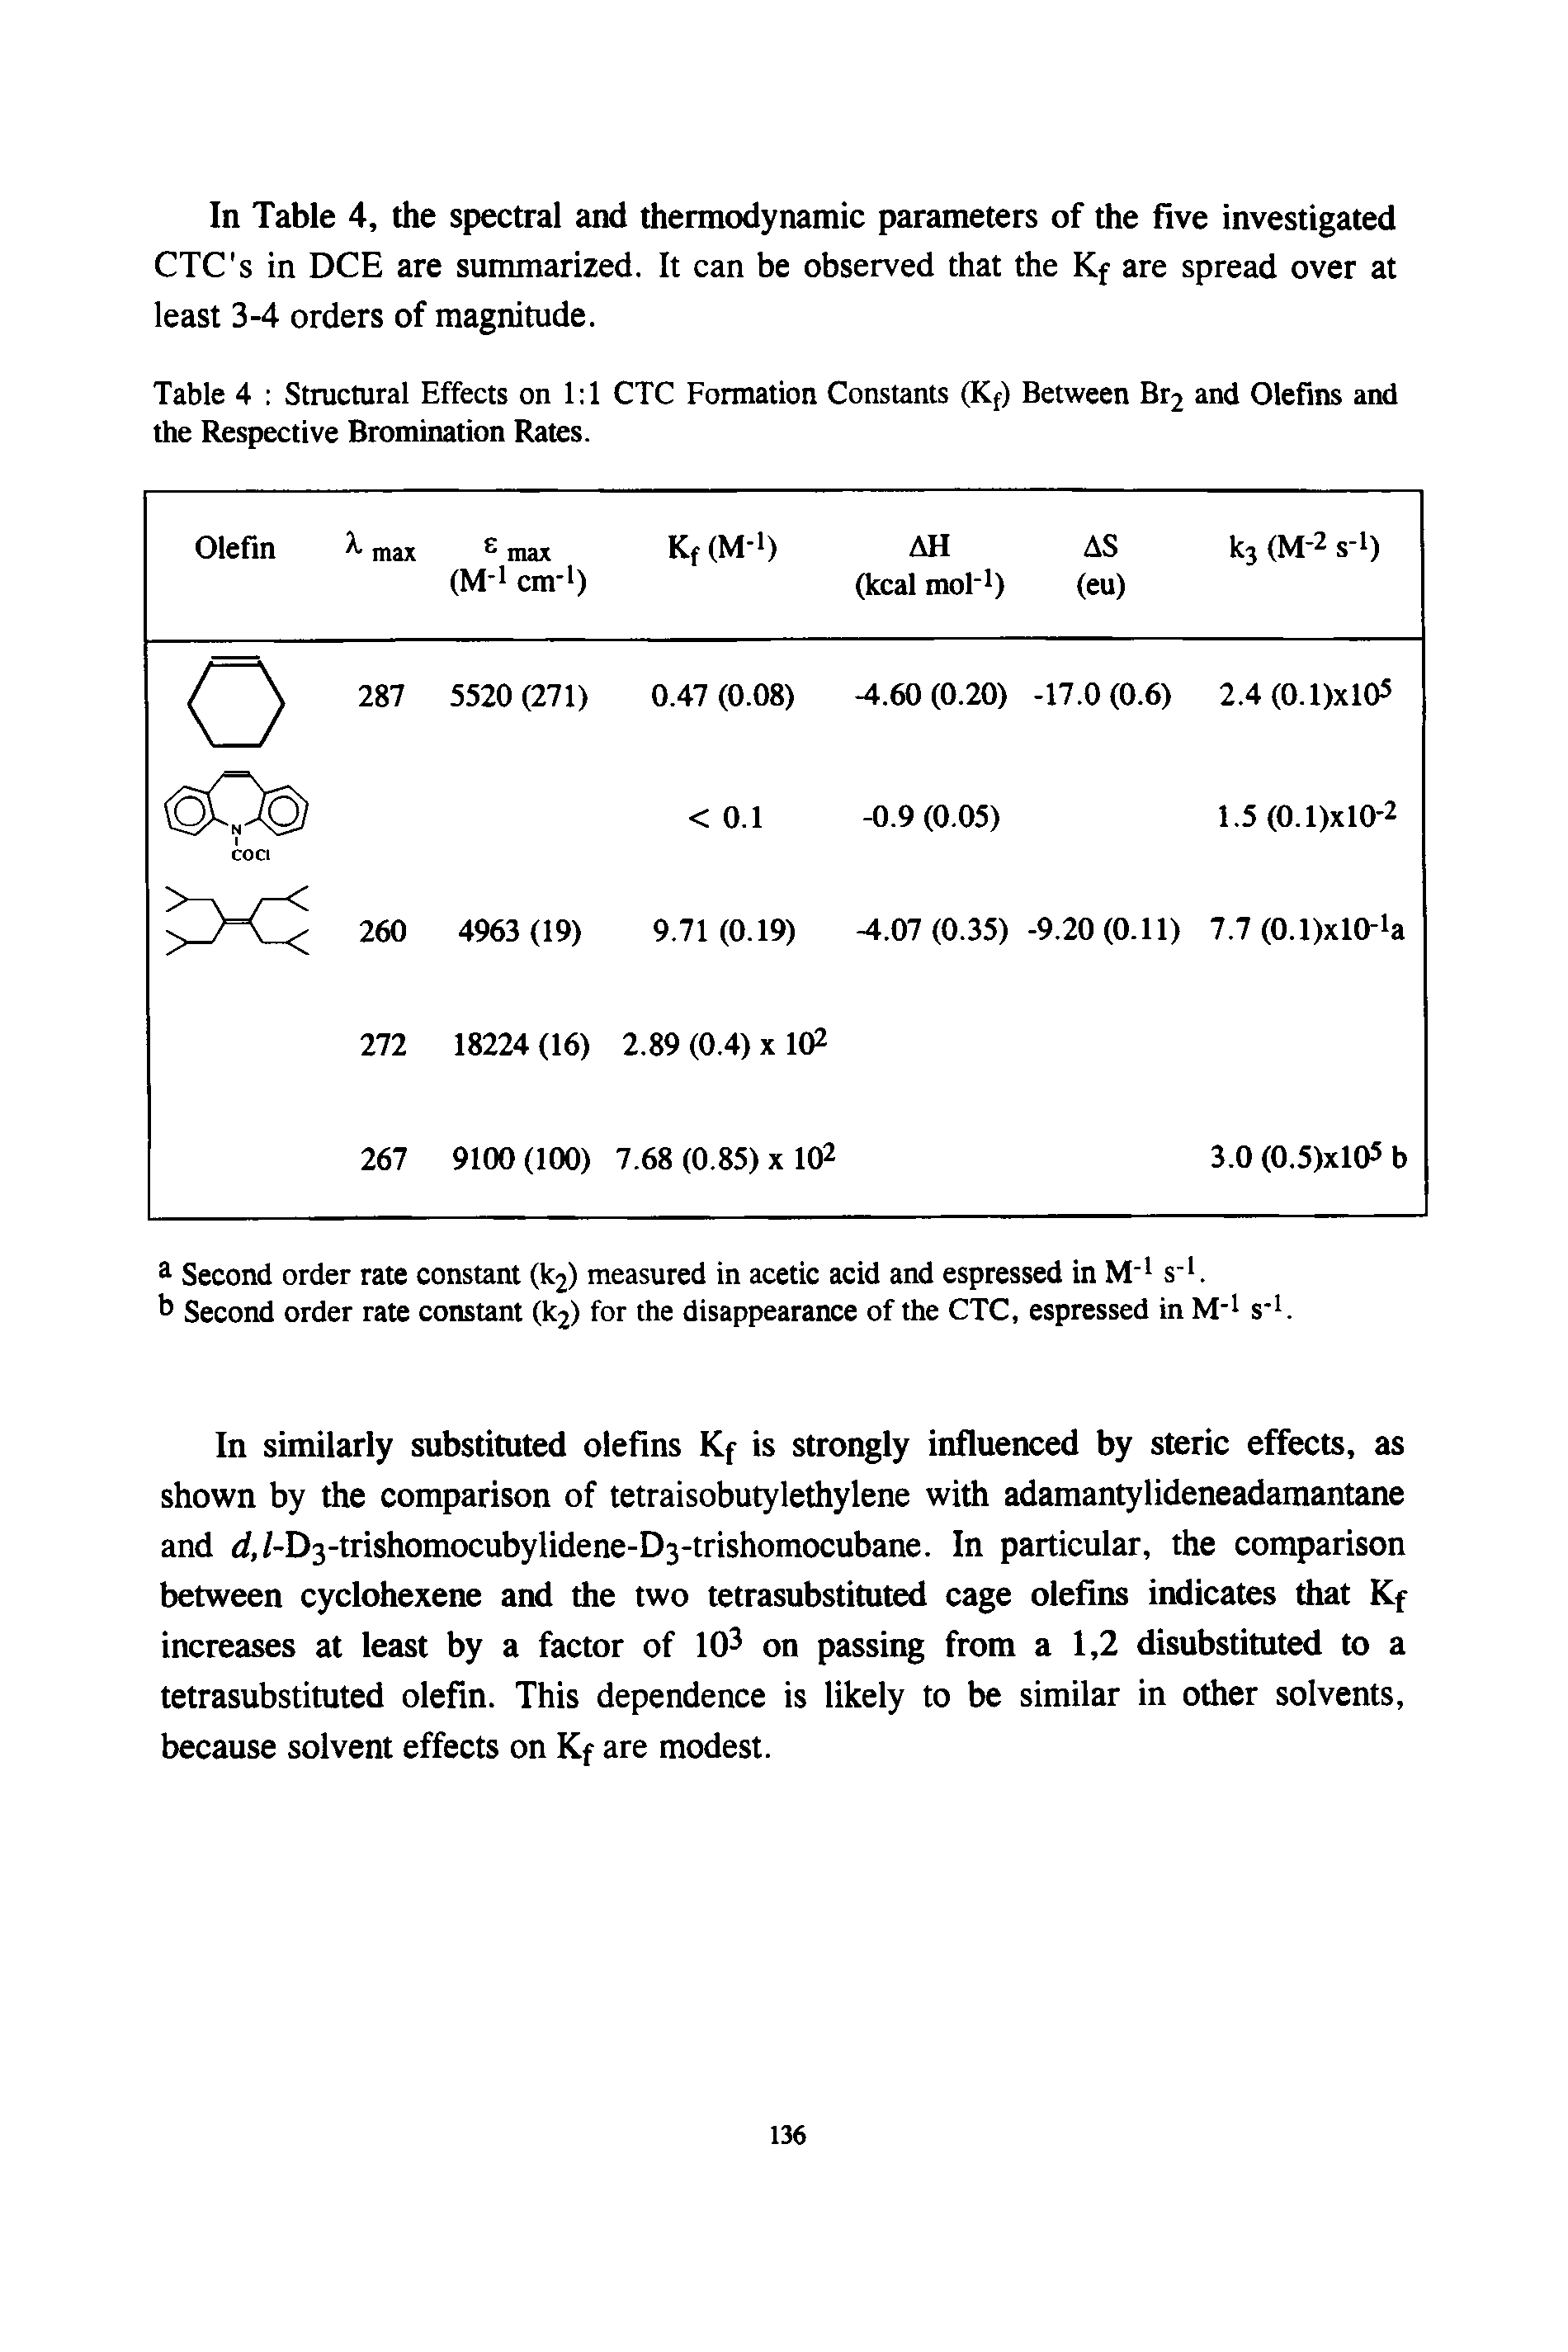 Table 4 Structural Effects on 1 1 CTC Formation Constants (Kf) Between Br2 and Olefins and the Respective Bromination Rates.